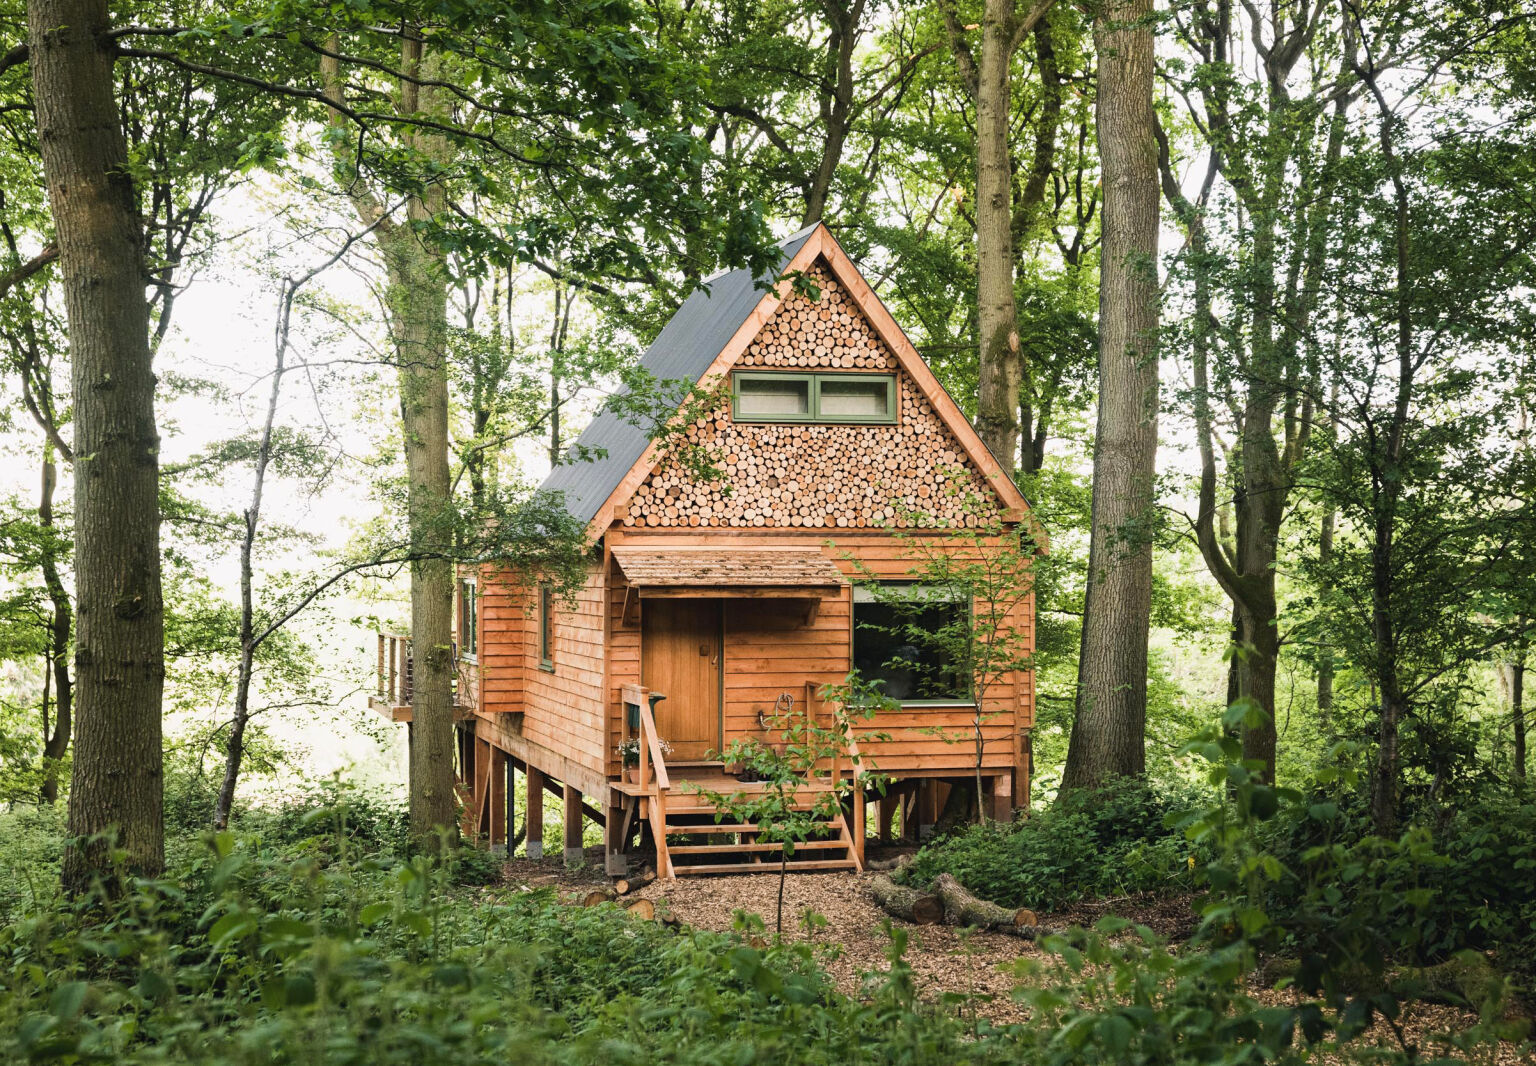 The Quist, a tree cabin rental in Herefordshire, England. Luke Atkinson photo.